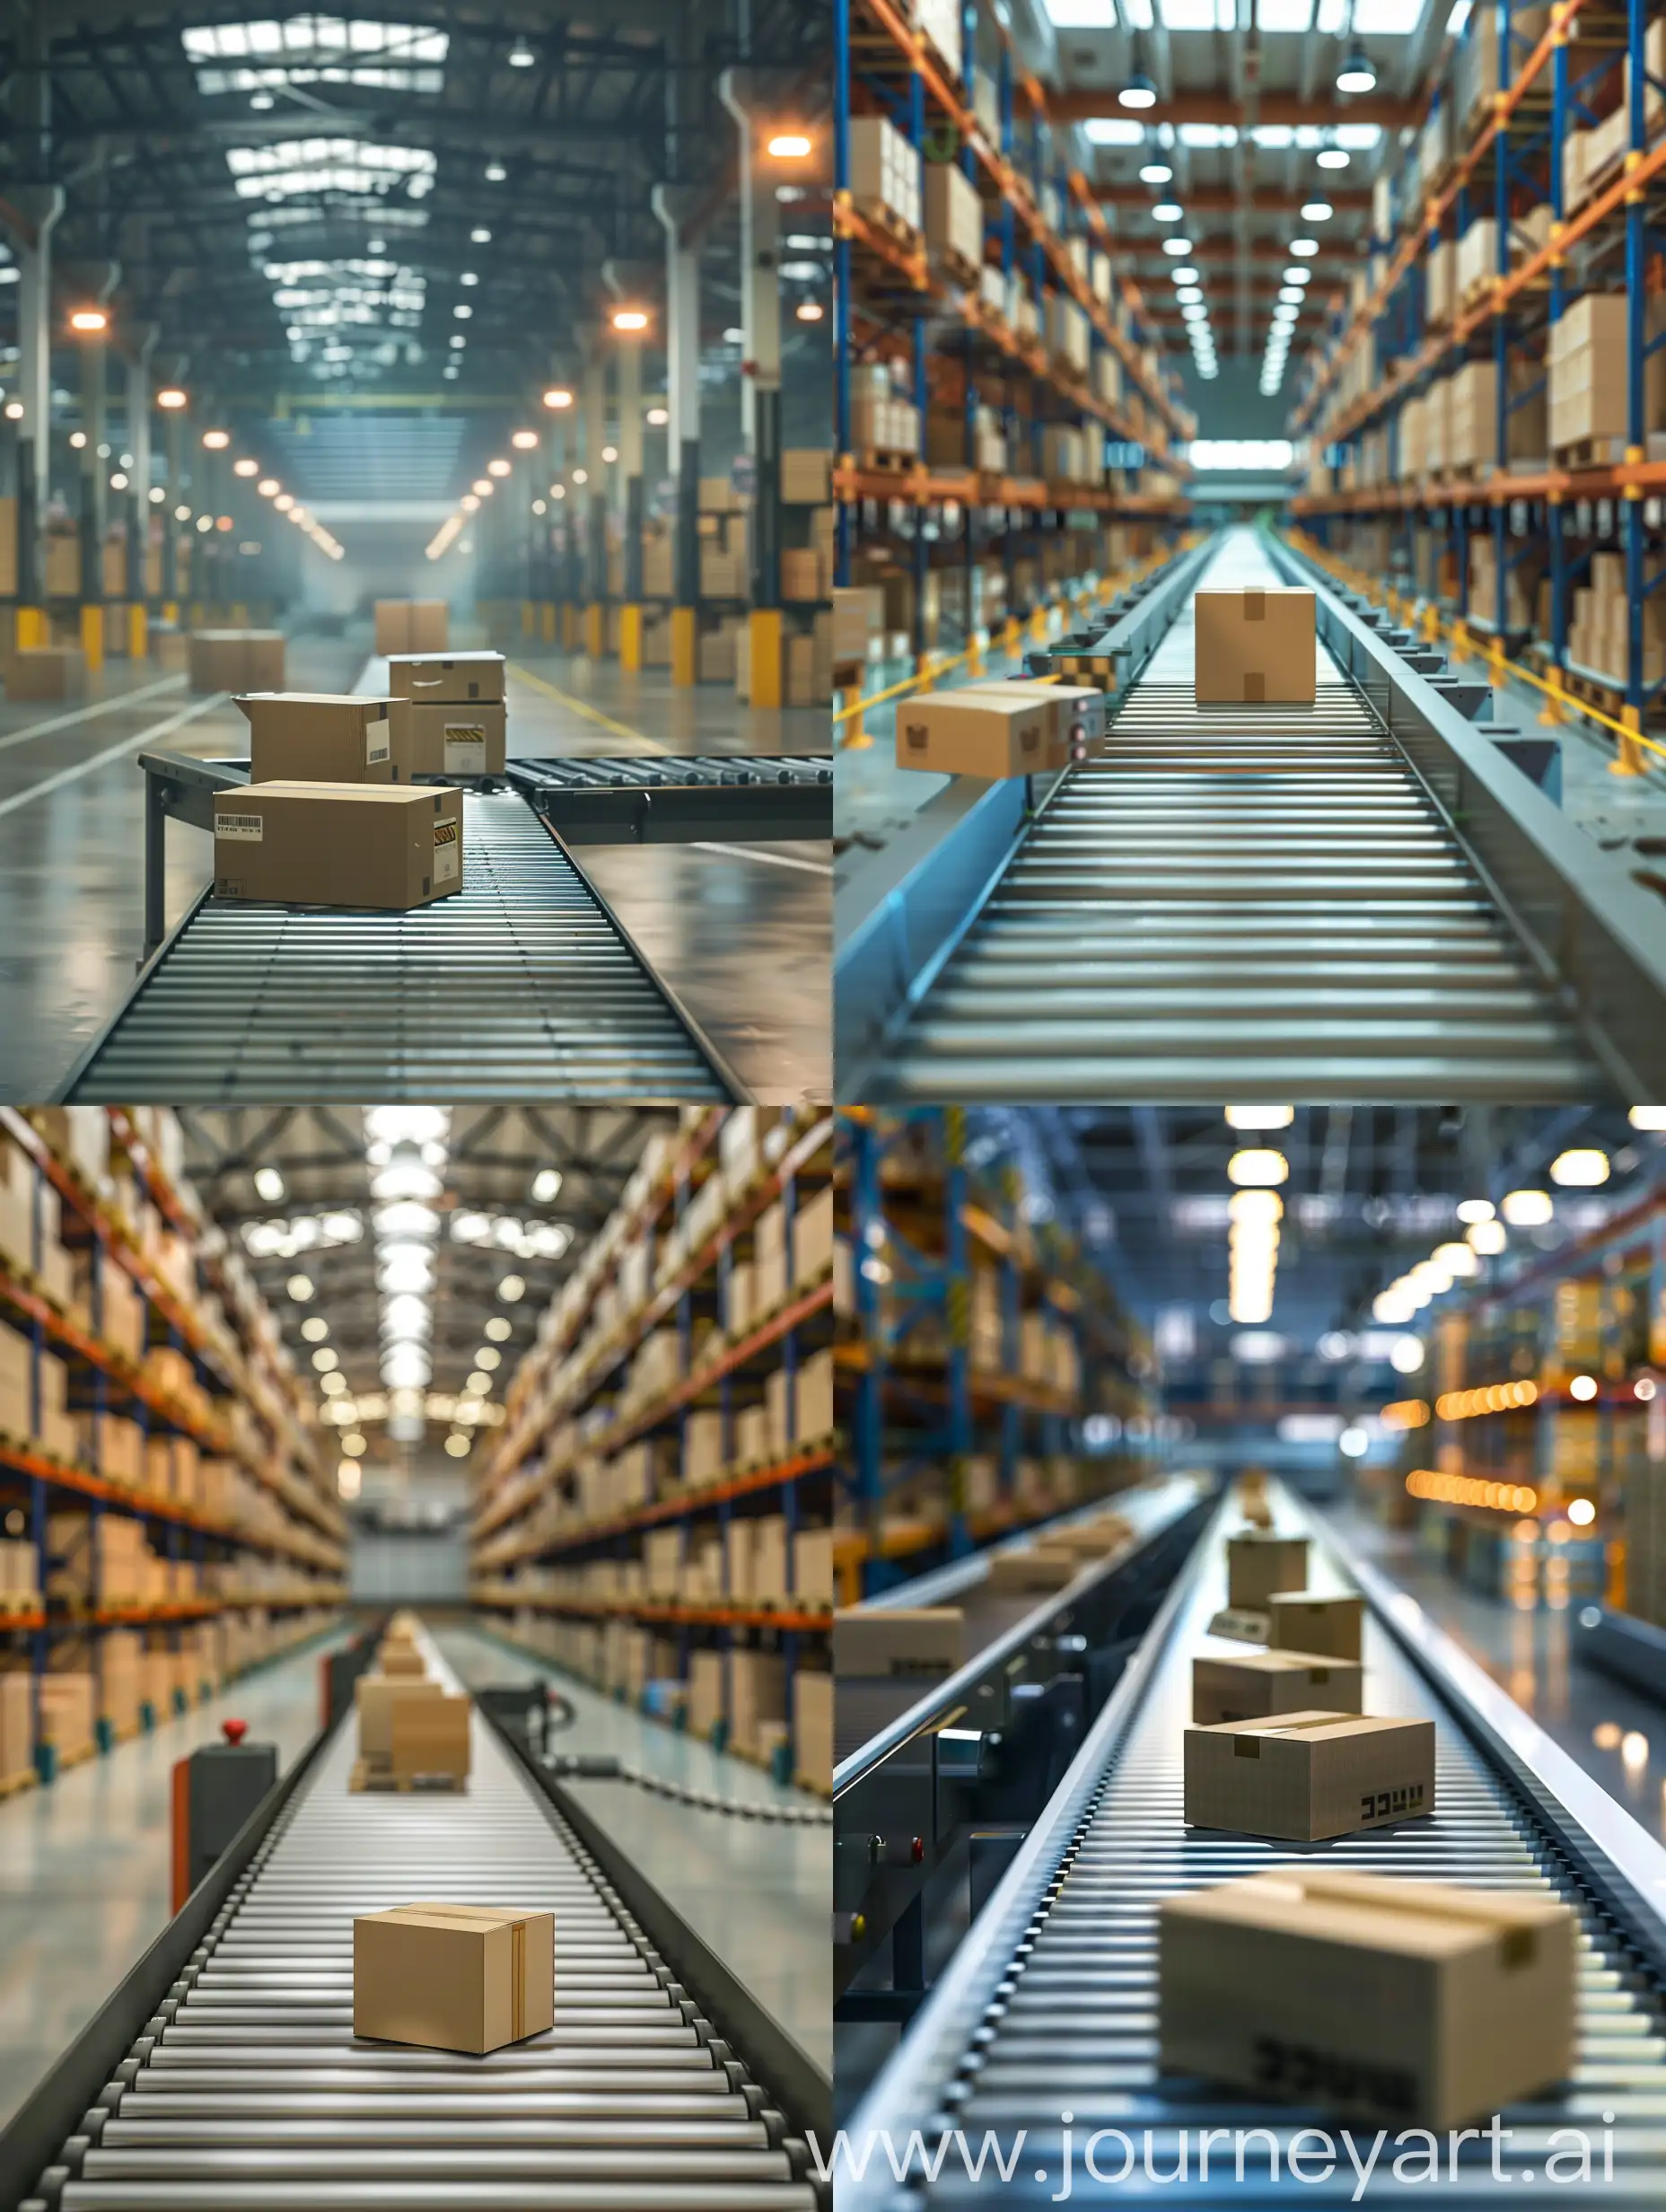 Modern-Cloud-Warehouse-with-Automated-Conveyor-Belt-and-Packaged-Boxes